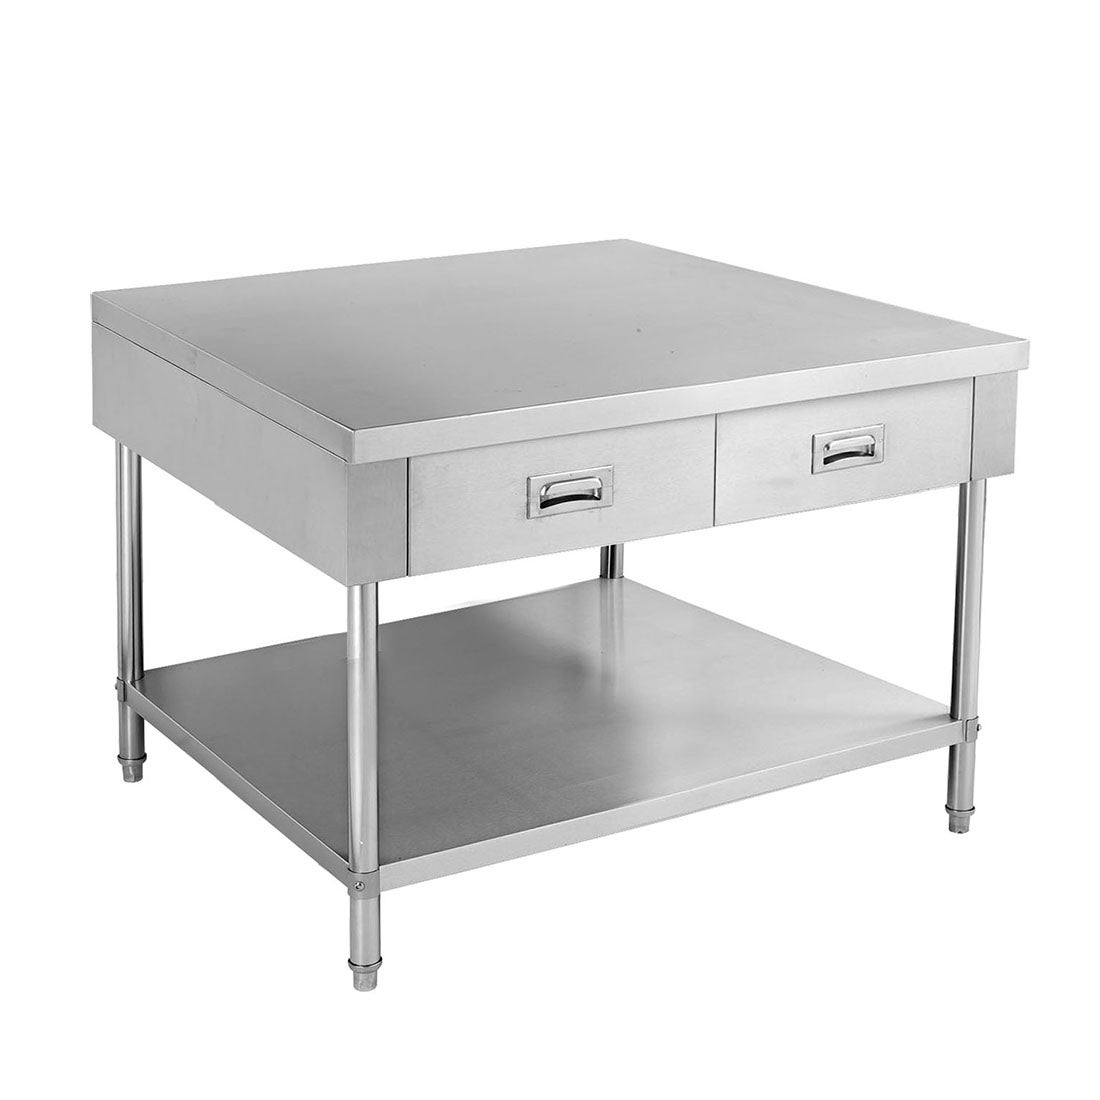 Comchef SWBD-7-1200 Work bench with 2 Drawers and Undershelf